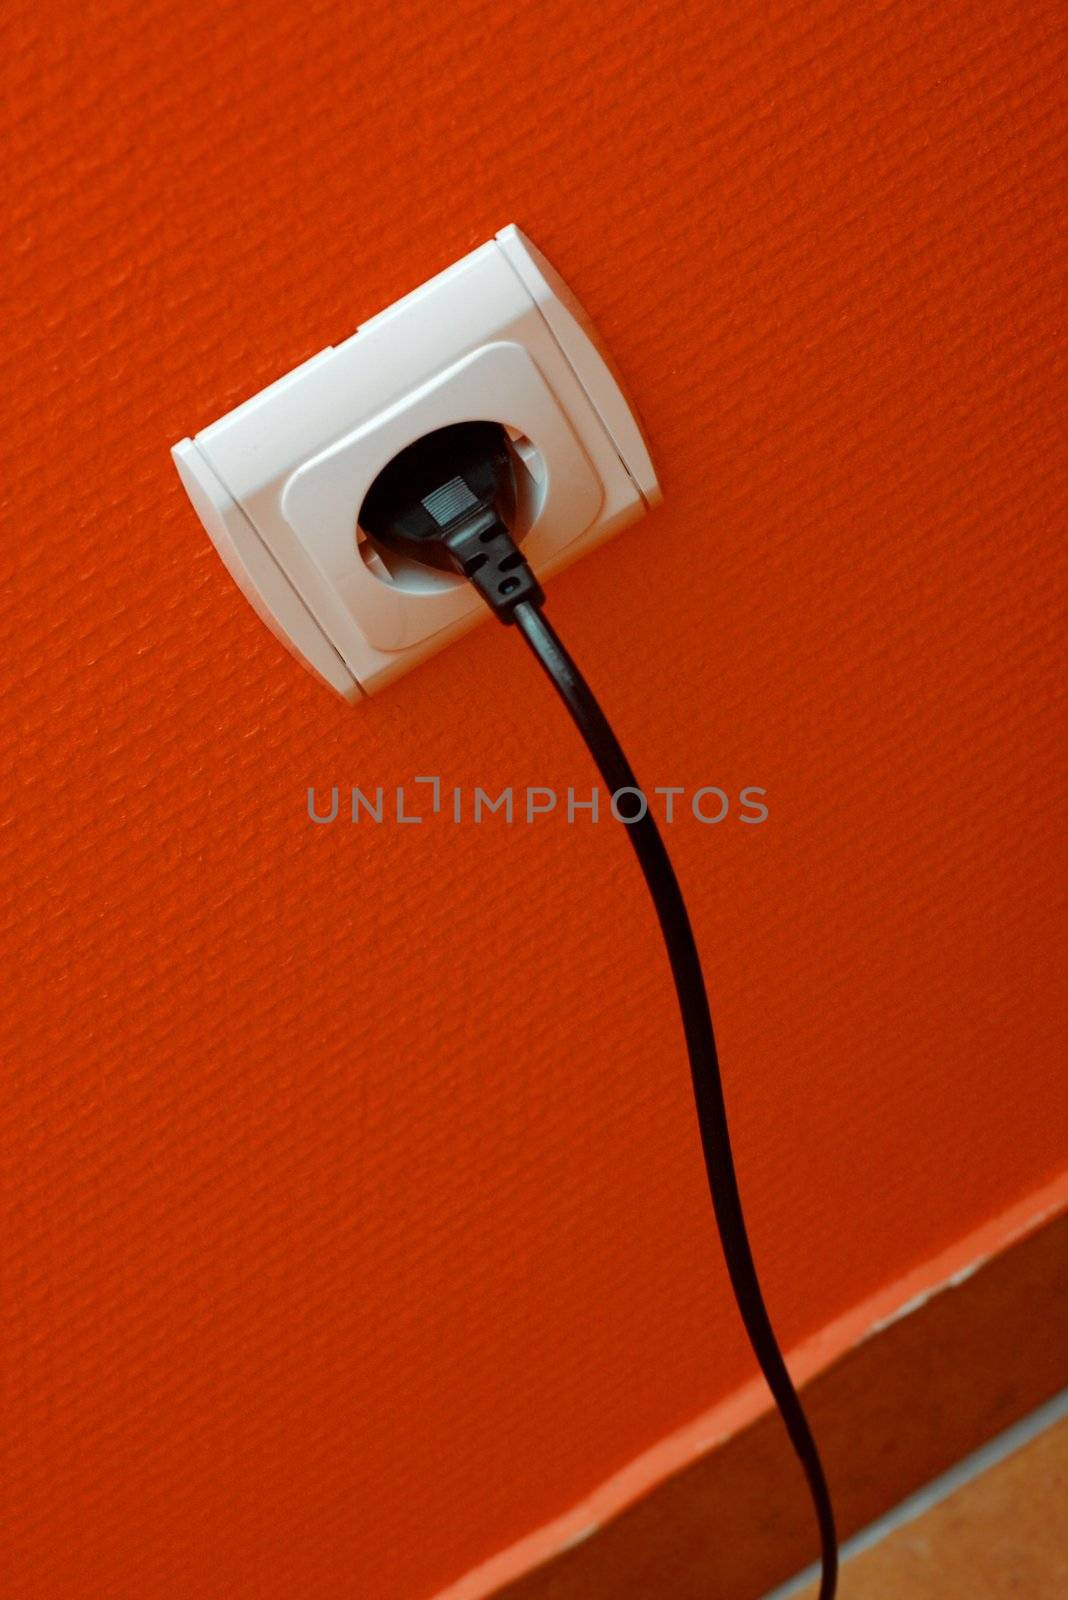 Electric cable plugged into the wall outlet